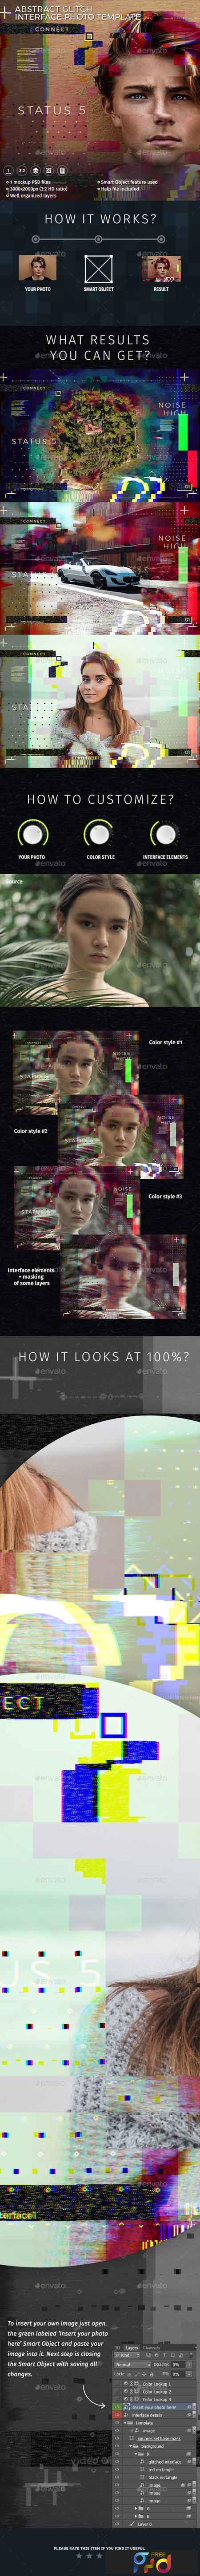 Abstract Glitch Photo Interface Template 22742649 1